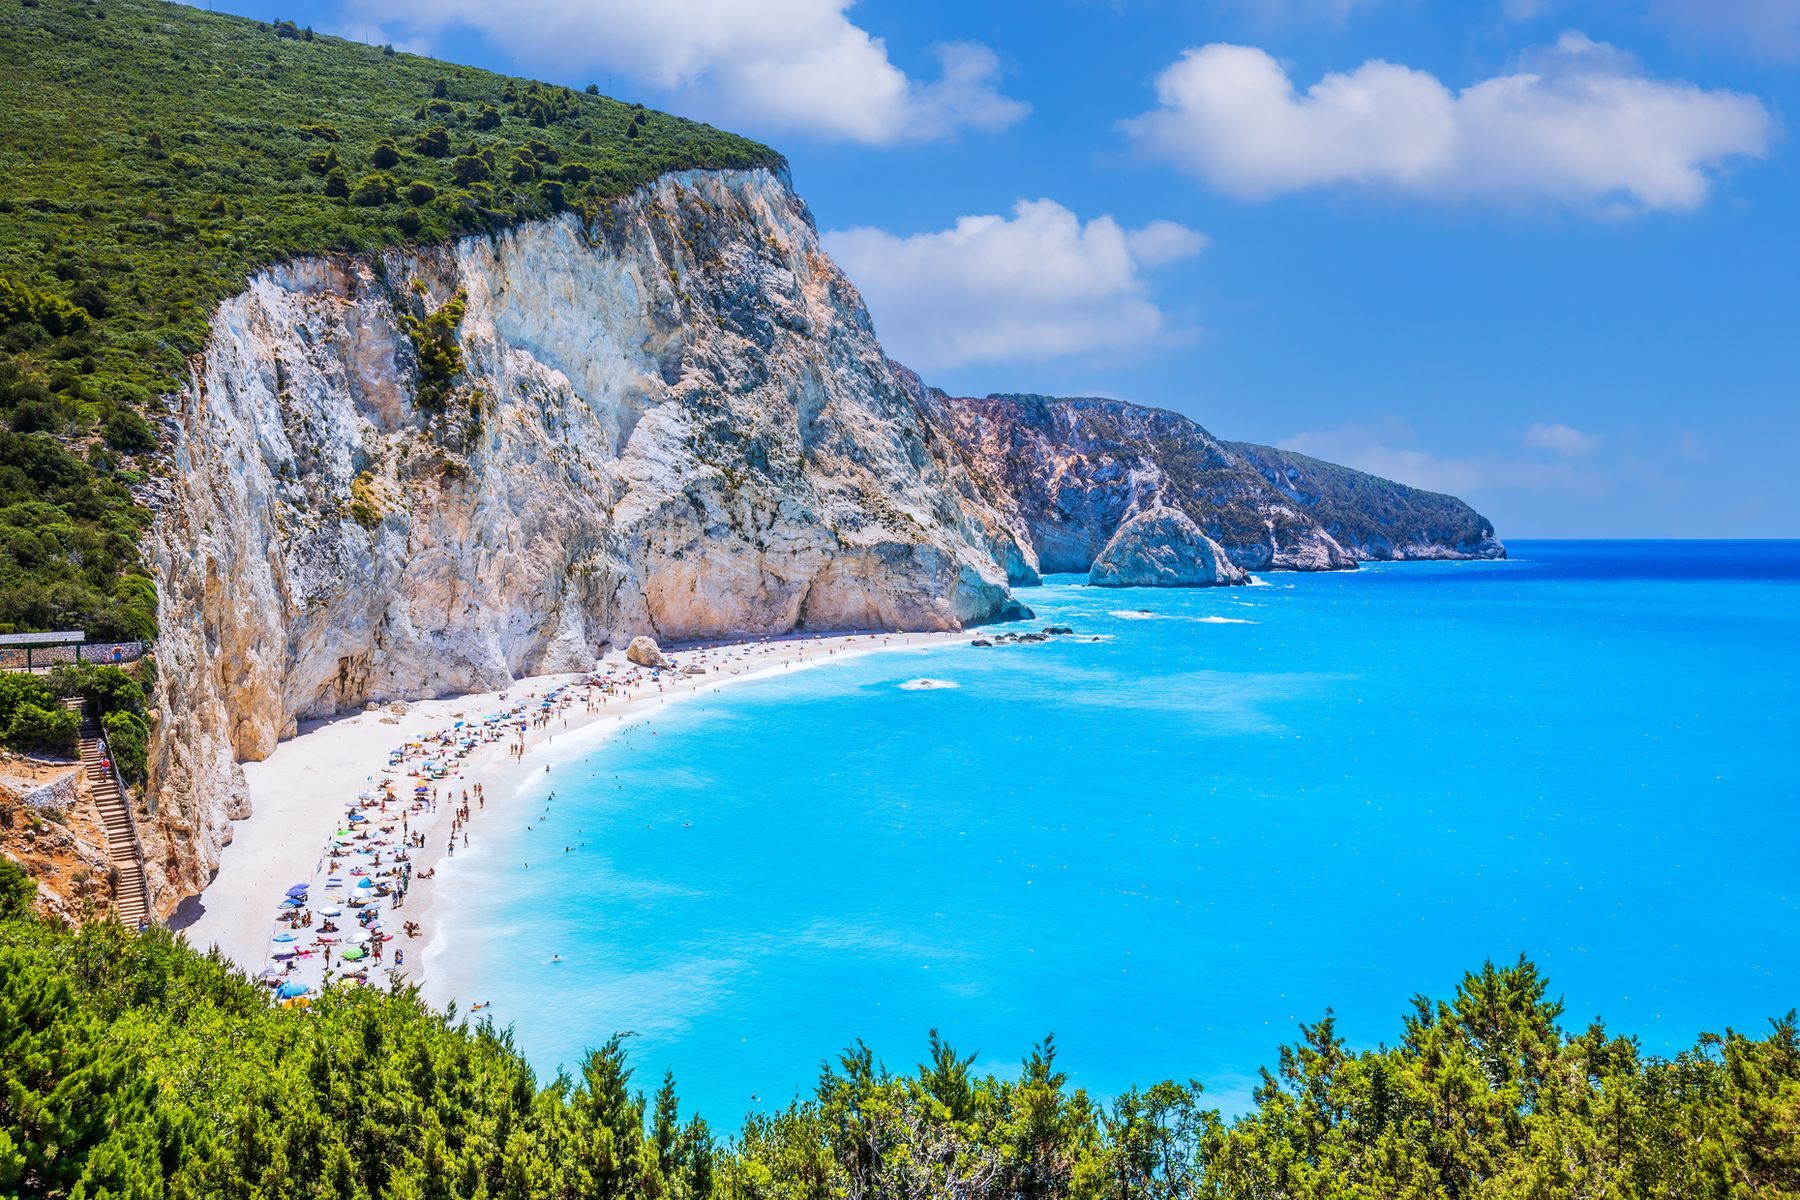 Dreaming of a seaside getaway? It’ll be love at first sight on <a href="https://www.discovergreece.com/ionian-islands/lefkada" rel="noreferrer noopener">Lefkada</a>, an idyllic island in the Ionian Sea. Located in the middle of what’s known as the “Caribbean of Greece” due to its tropical climate, Lefkada offers relaxing excursions to paradise <a href="https://www.lefkada-travel.com/en/beaches-in-lefkada-island" rel="noreferrer noopener">beaches</a>, like Porto Katsiki and Egremni, where visitors can swim in deep blue waters. Those who want to get moving should explore the pretty village of <a href="https://www.greeka.com/ionian/lefkada/villages/nidri/" rel="noreferrer noopener">Nidri</a> or try their hand at kitesurfing in Myli.